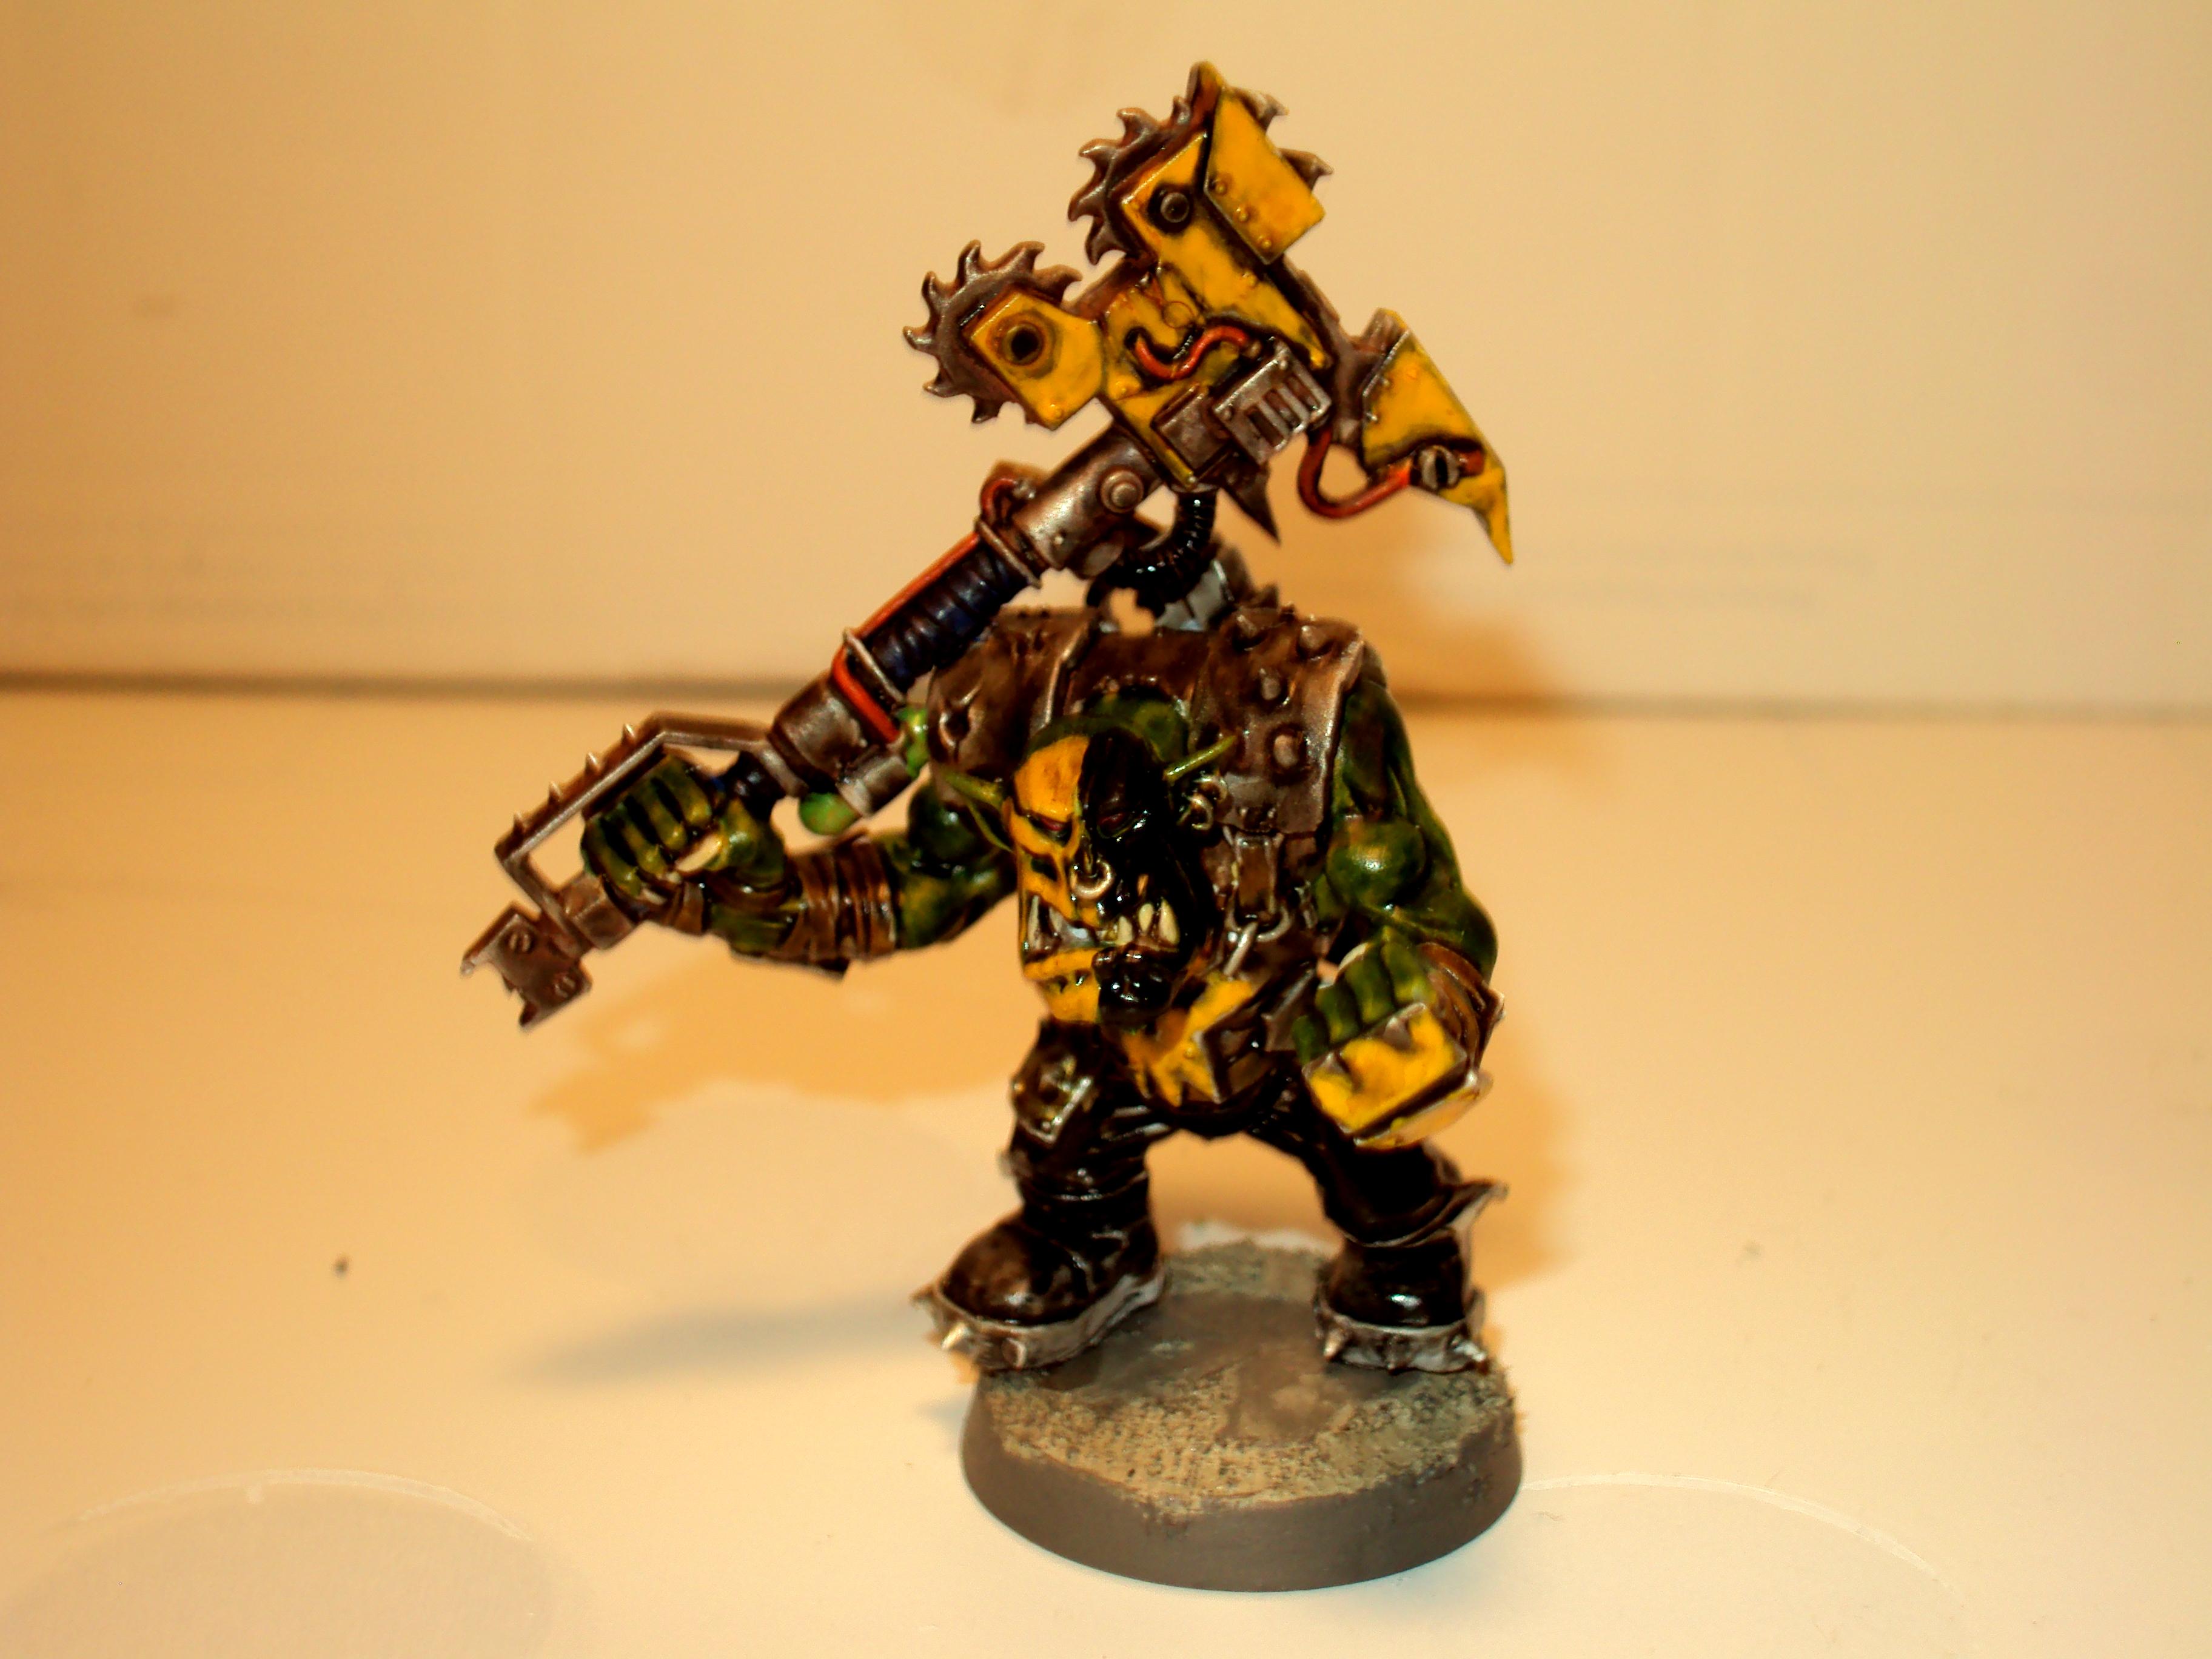 Bad Moons, Orks, Yellow Orks